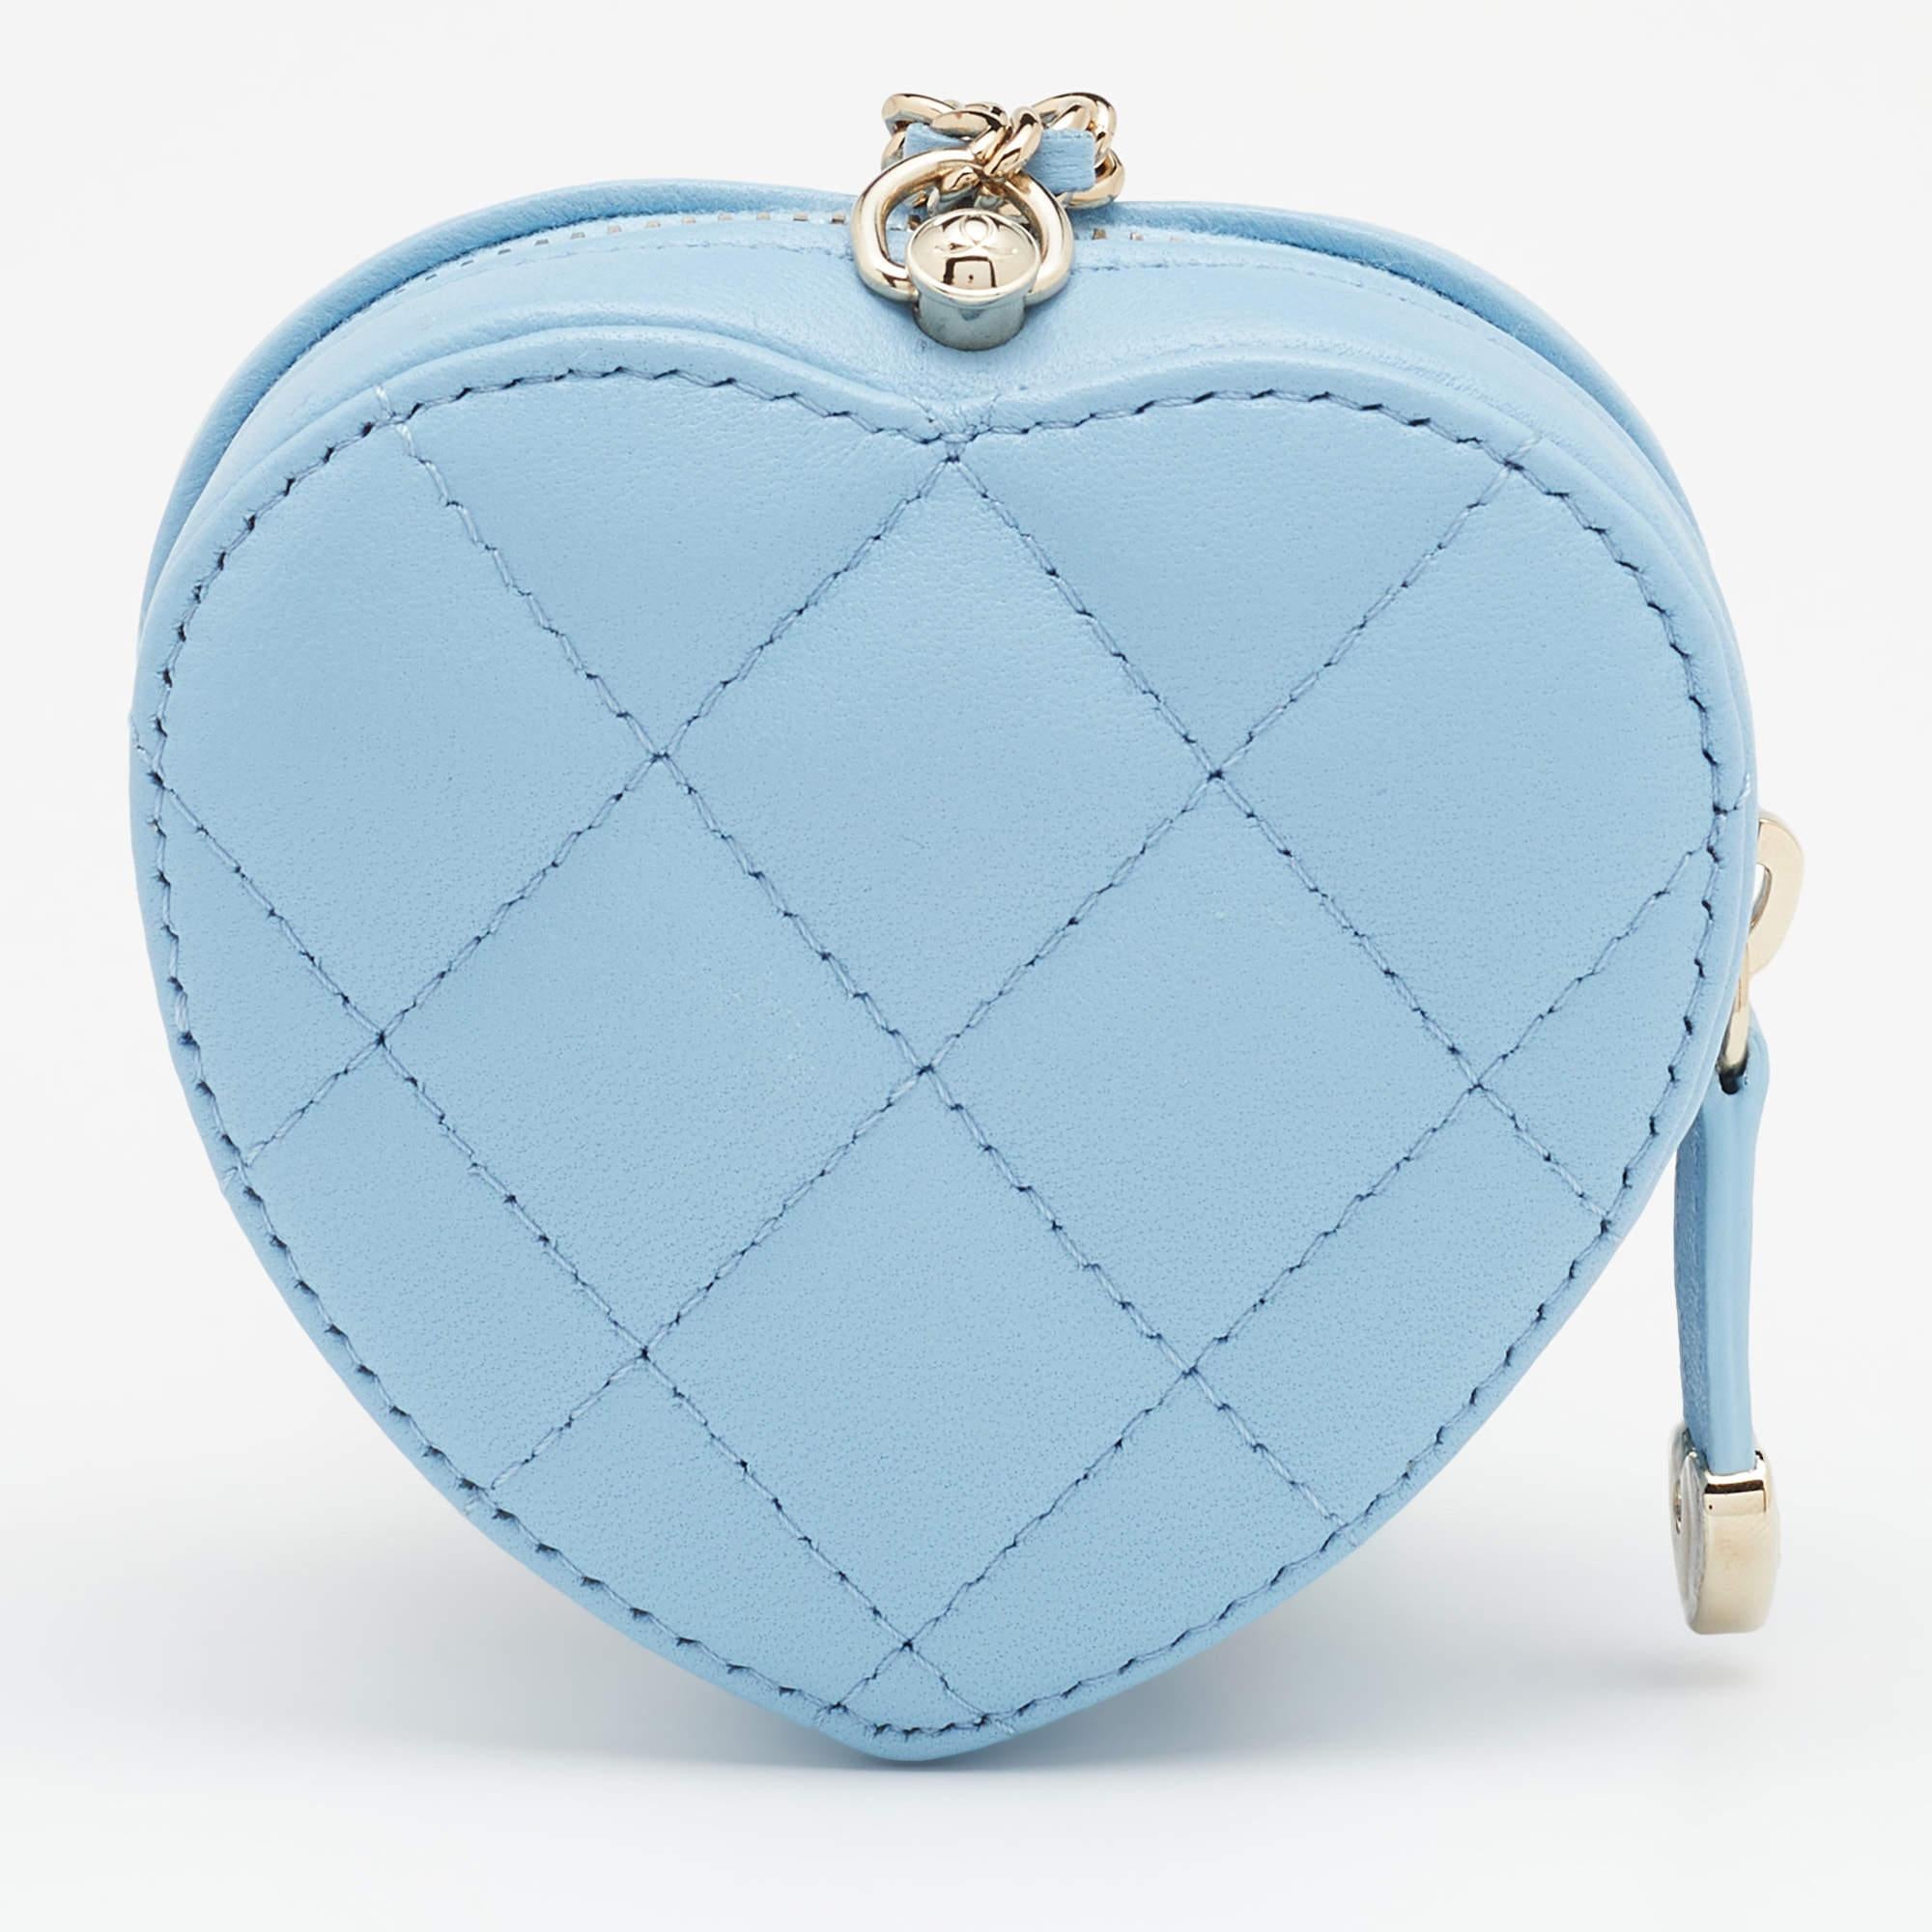 During Chanel's Spring/Summer 2022 show, the cute Heart bags stole the limelight and immediately started ruling the wishlist of the fashion elite. This blue Classic coin purse comes in an adorable shape and symbolizes the label's innovative